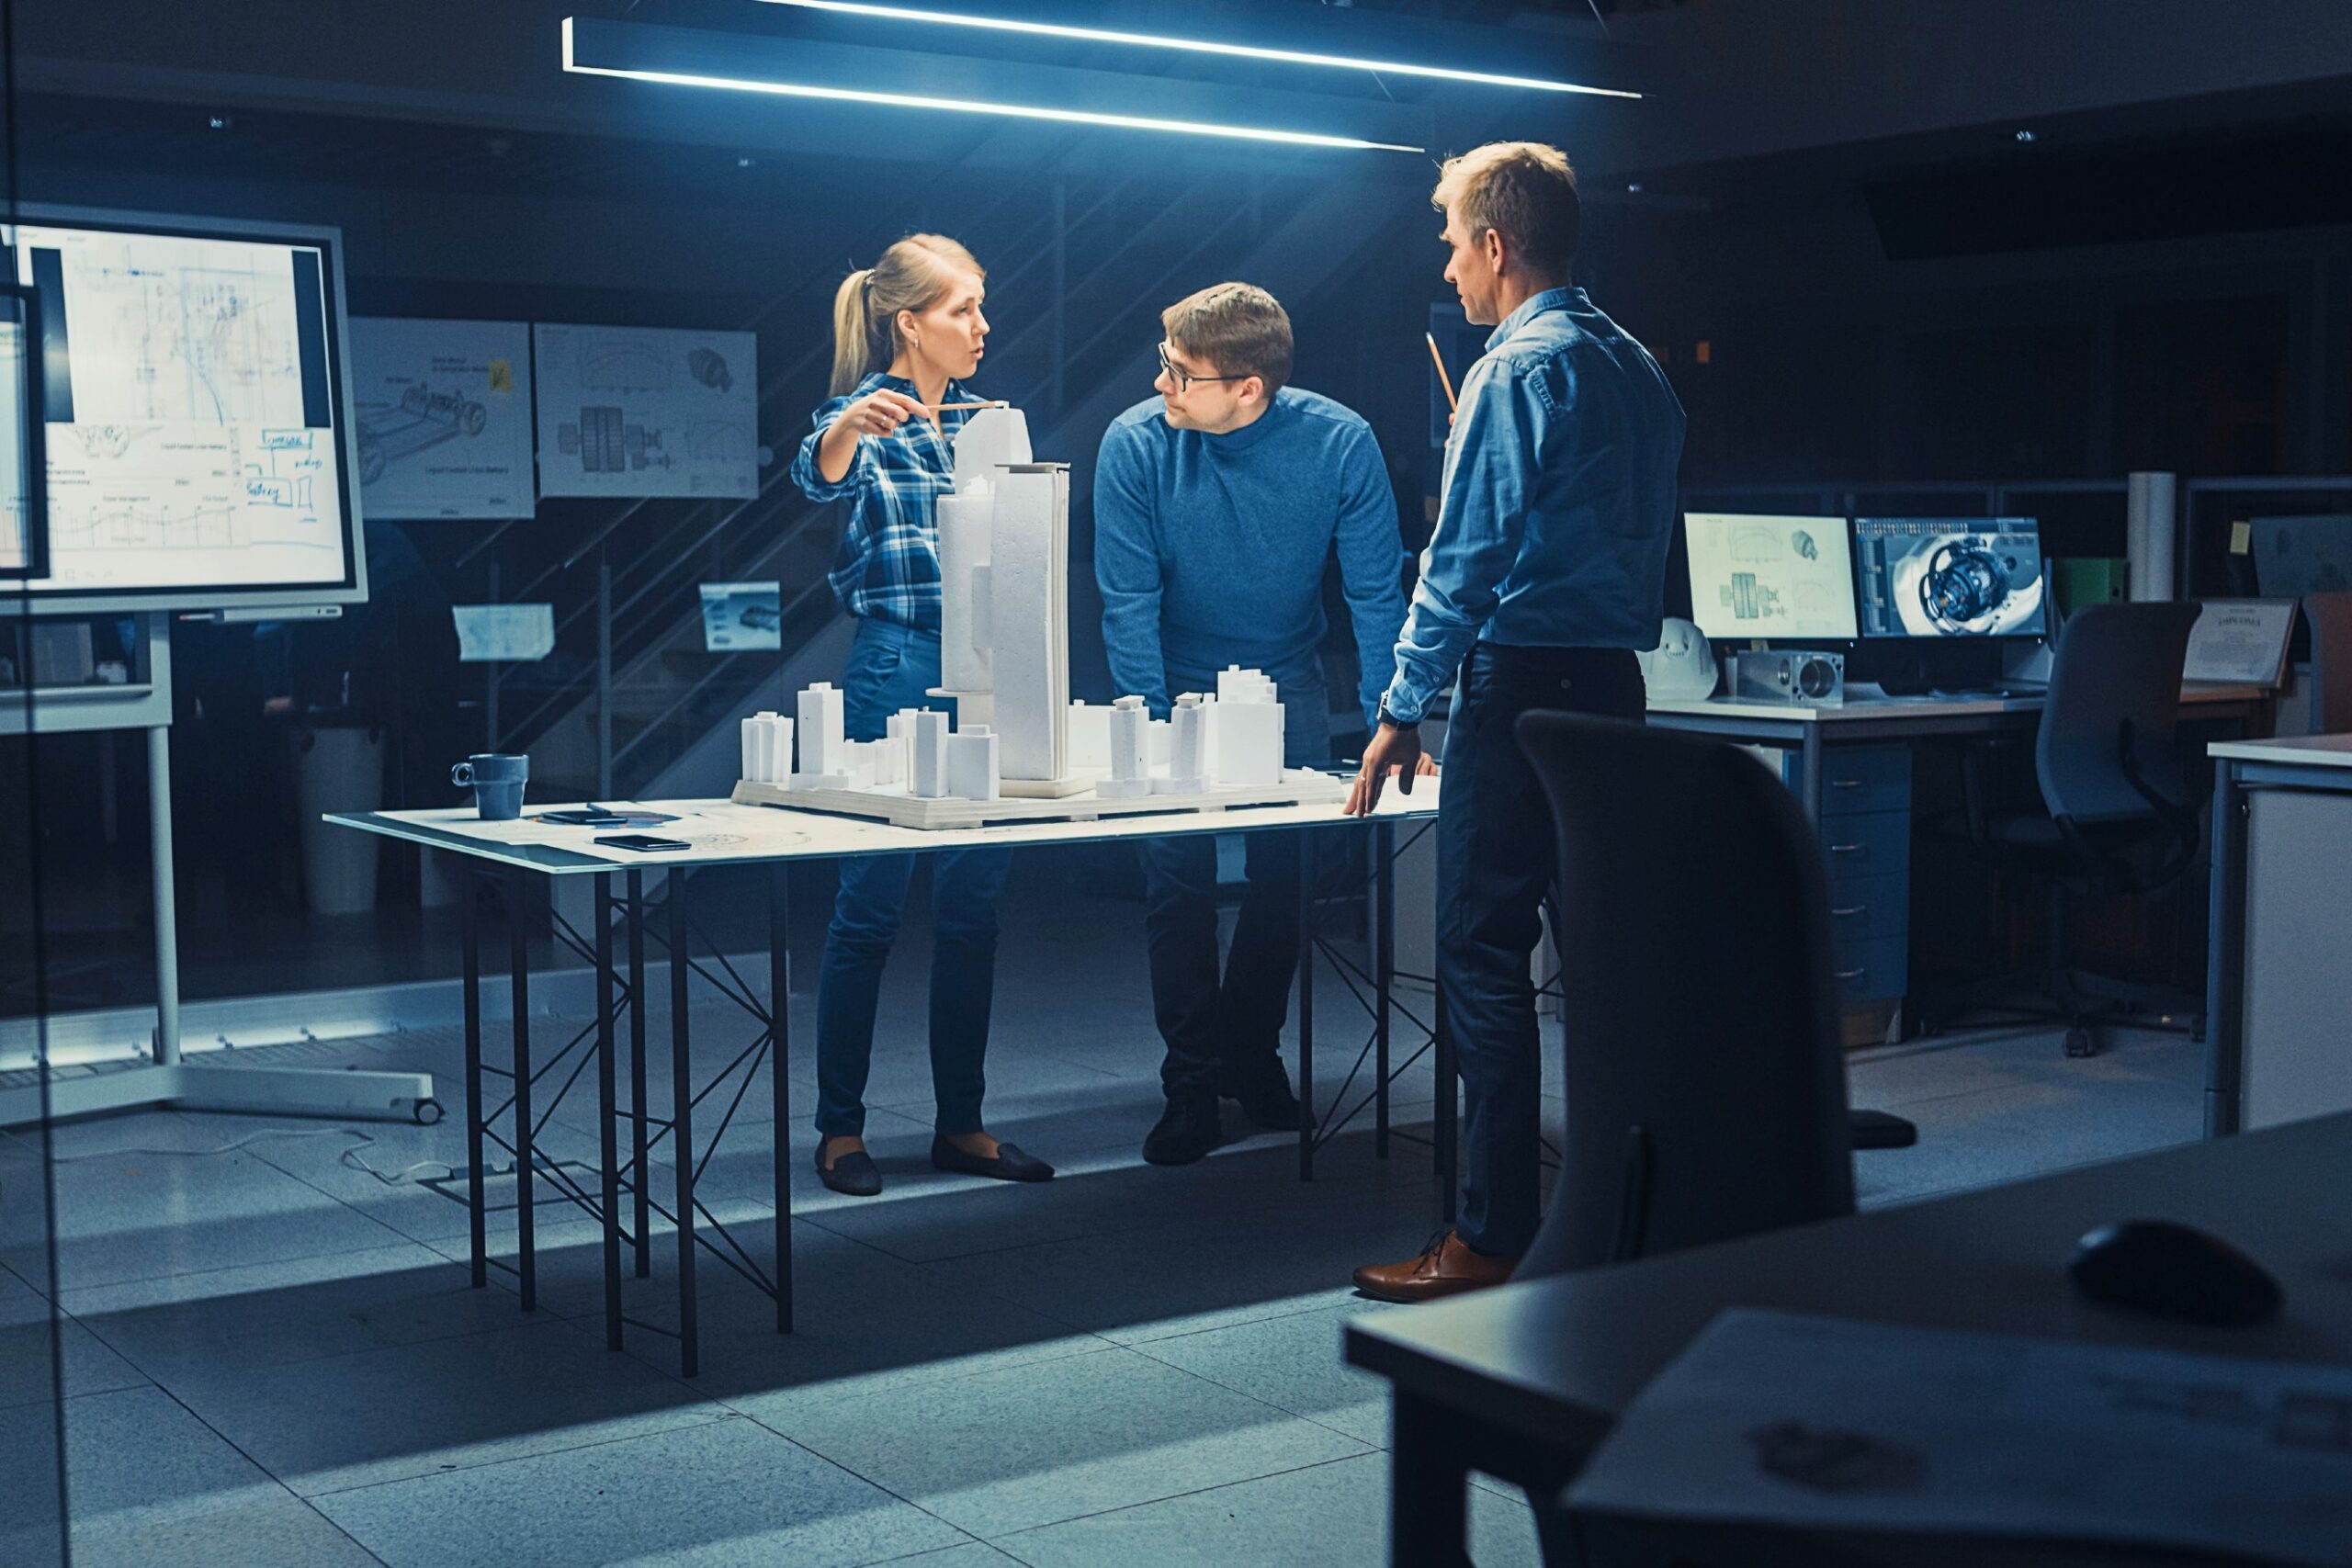 stock image of city planners looking at a model of a city while surrounded by computers and screens